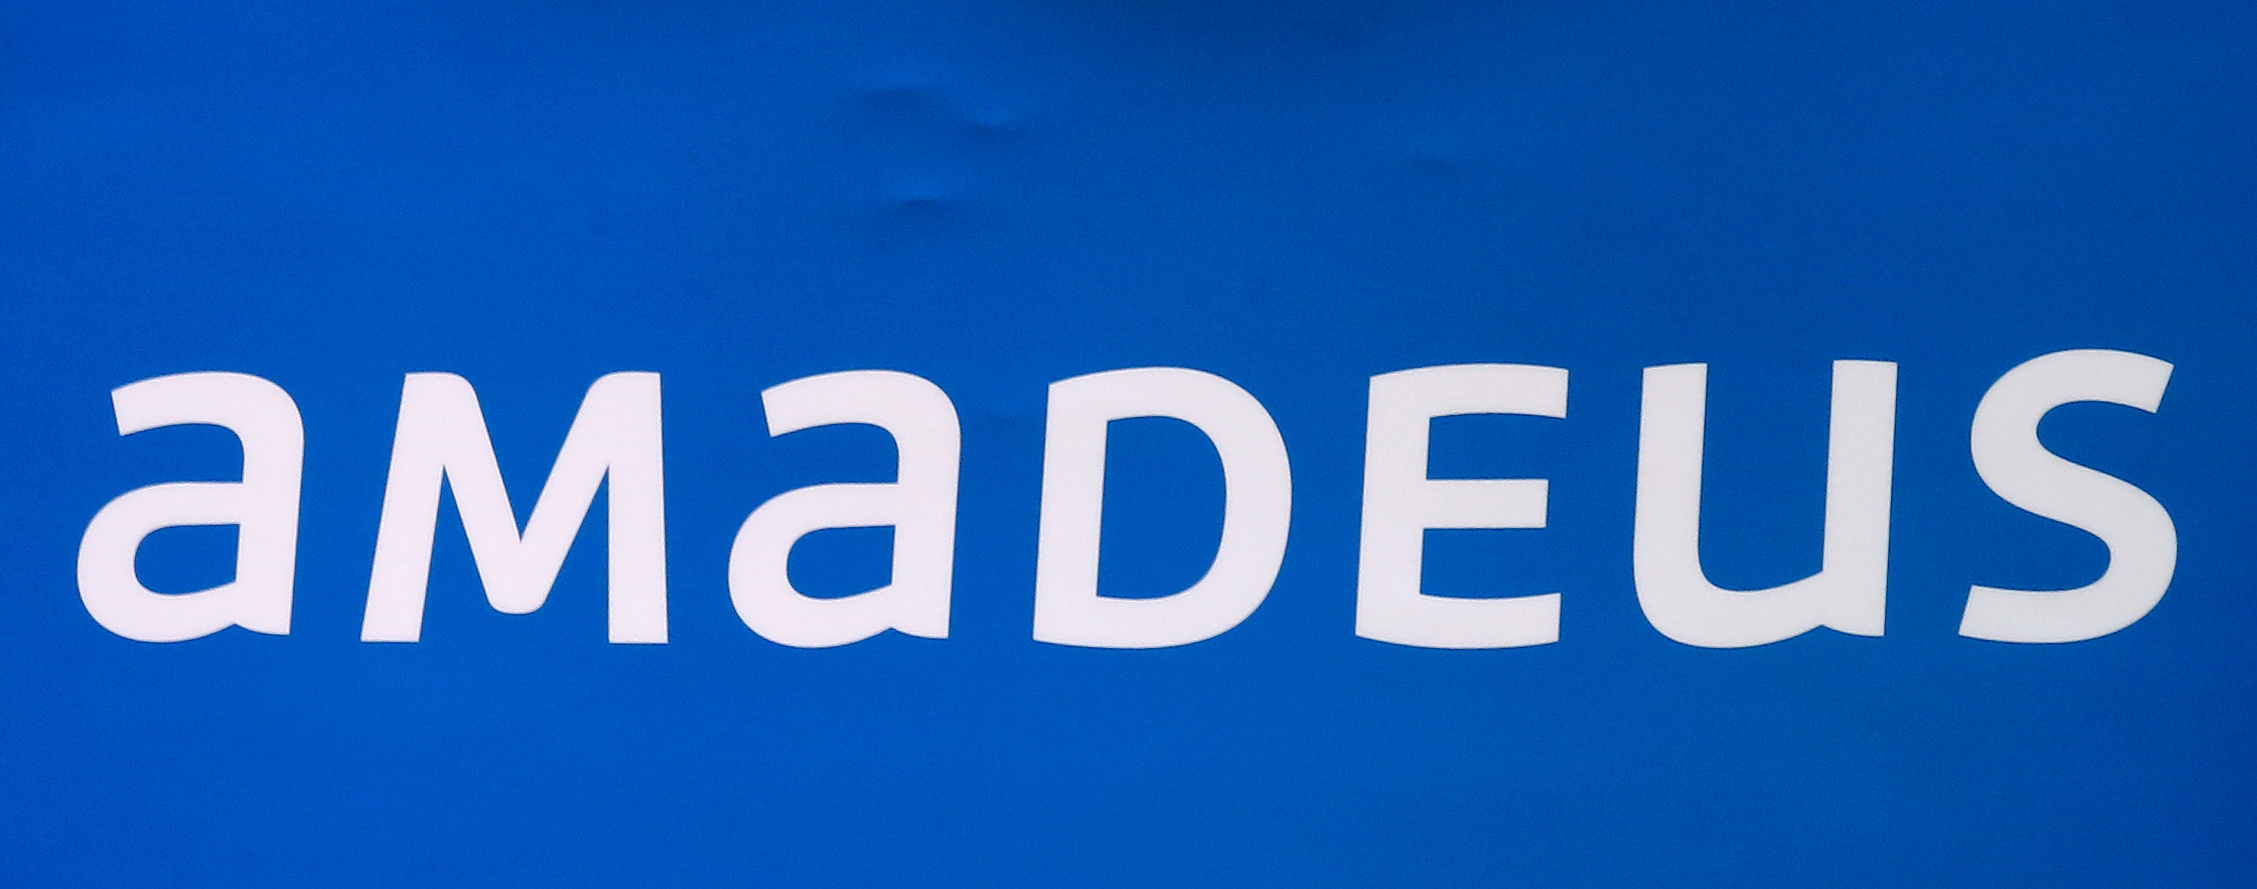 The logo of Amadeus can be seen in Madrid, Spain